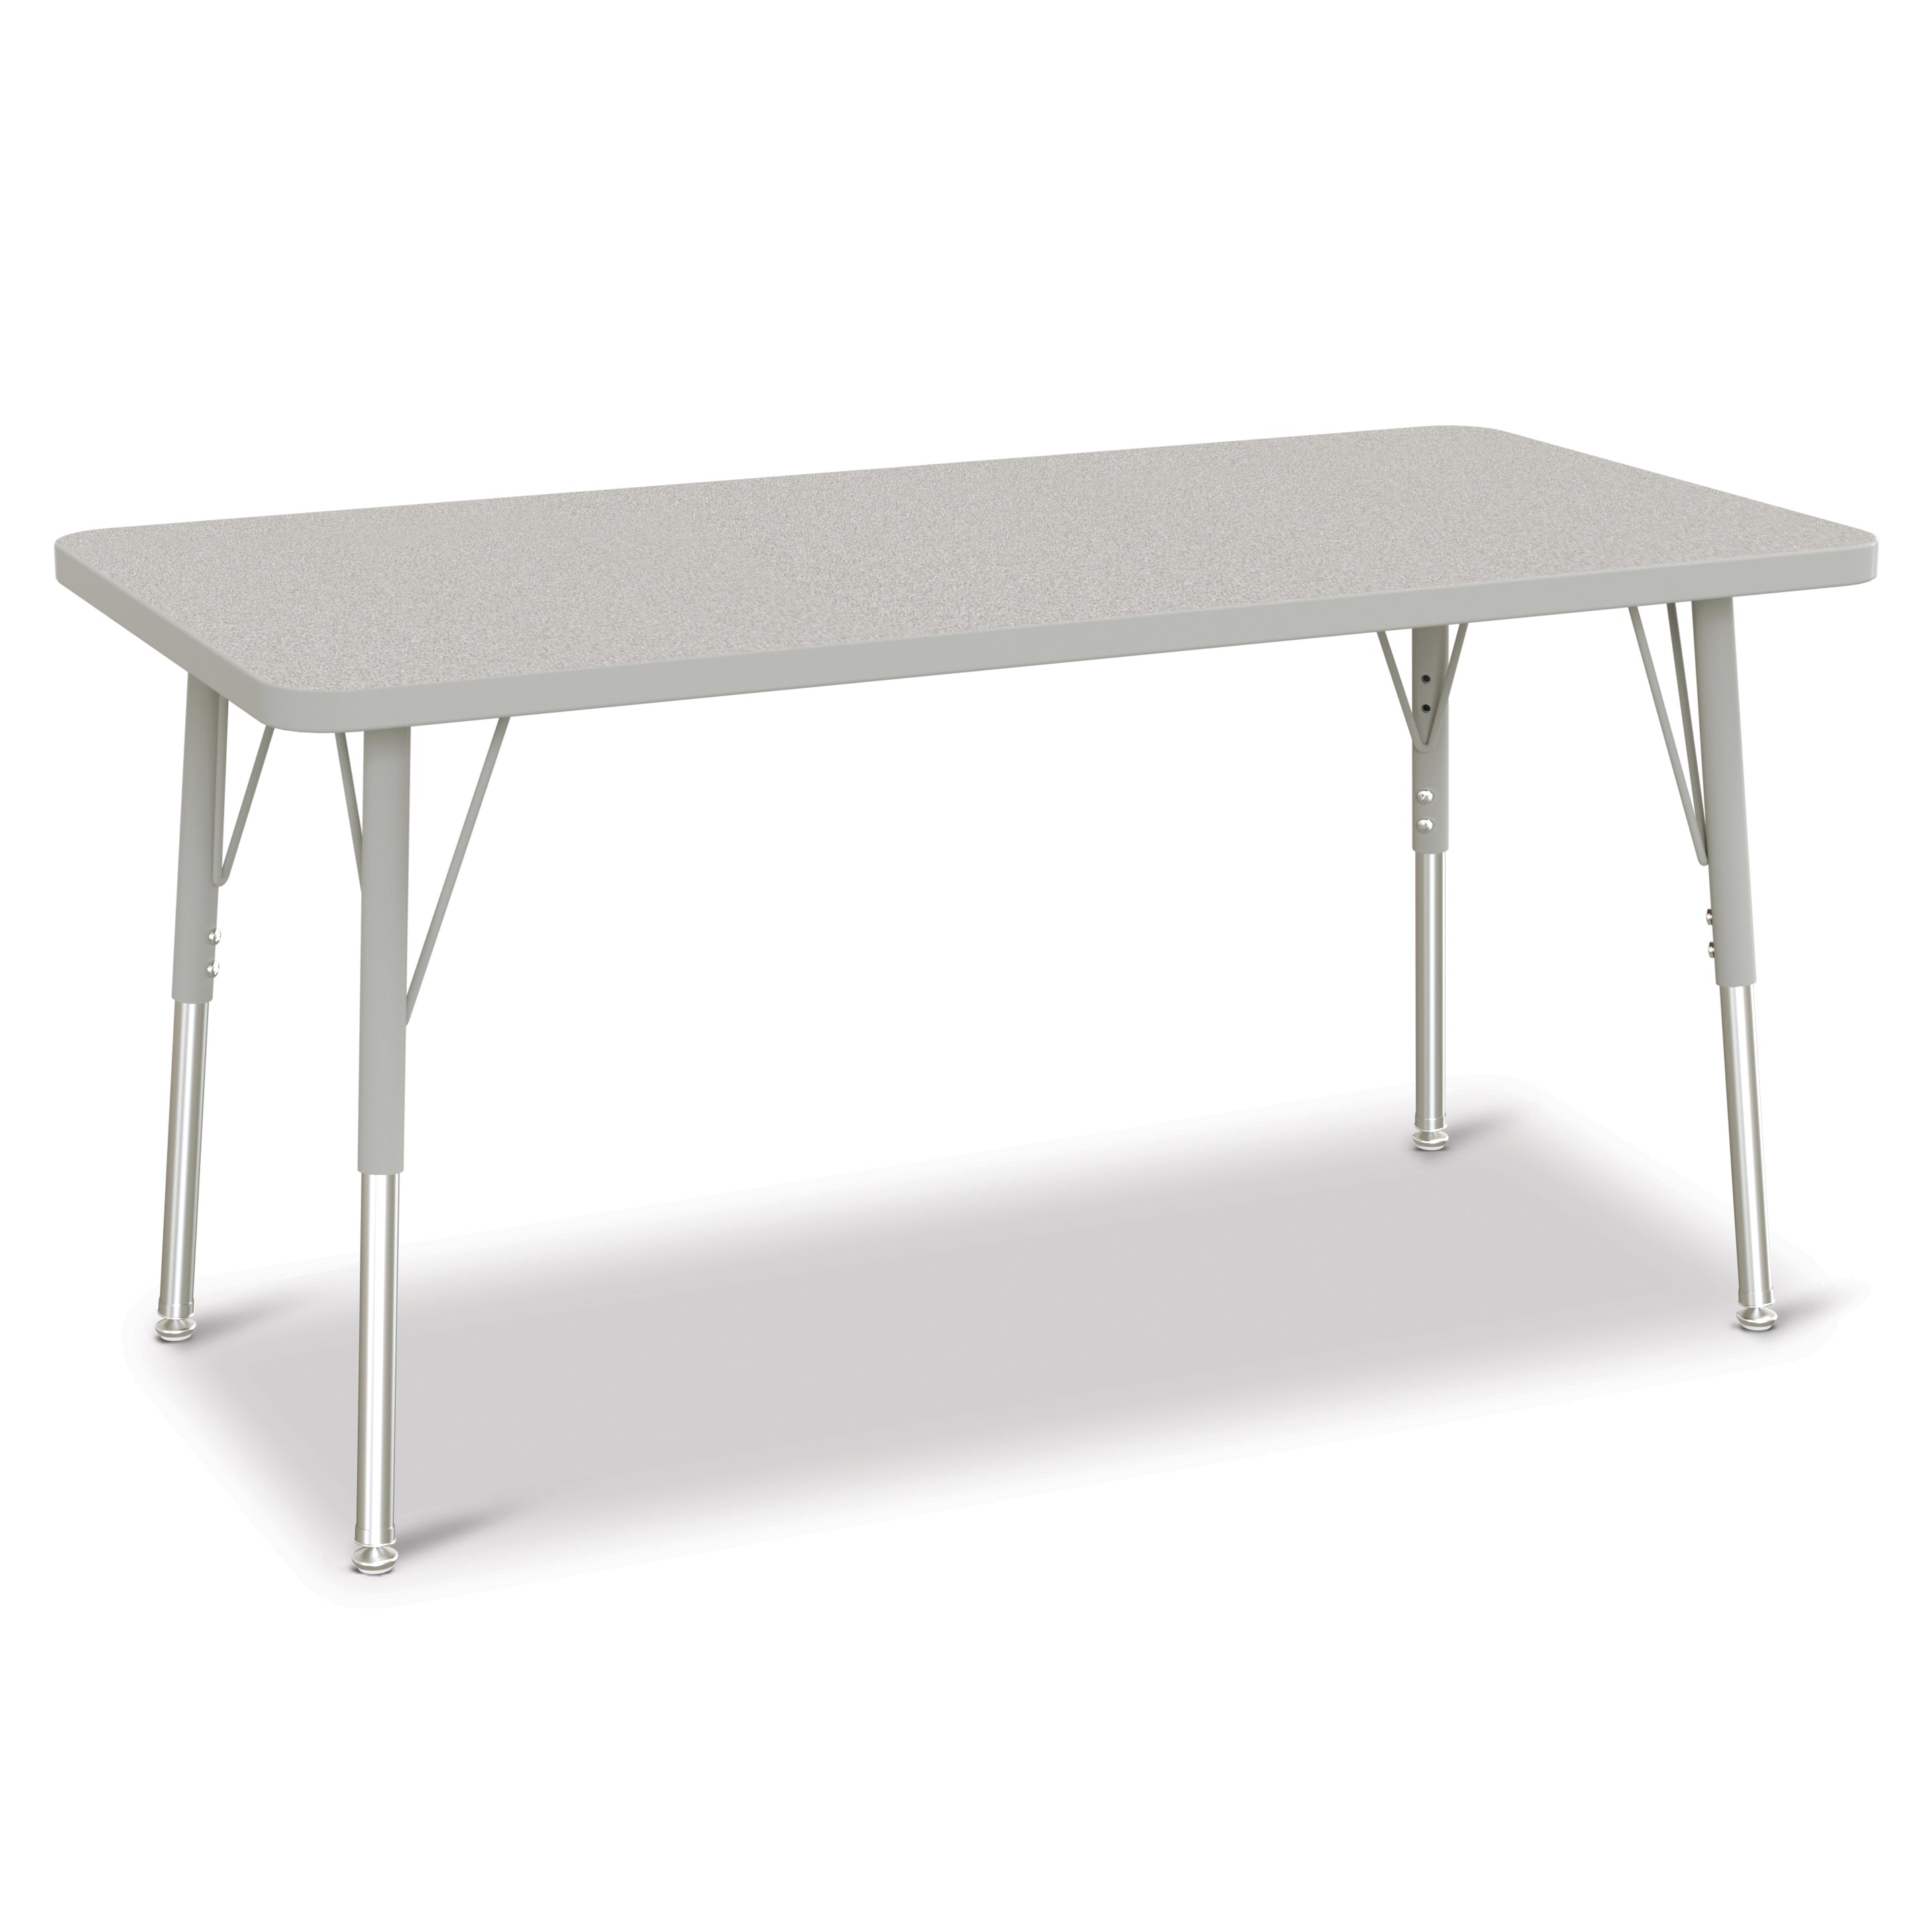 6403JCA000, Berries Rectangle Activity Table - 24" X 48", A-height - Freckled Gray/Gray/Gray